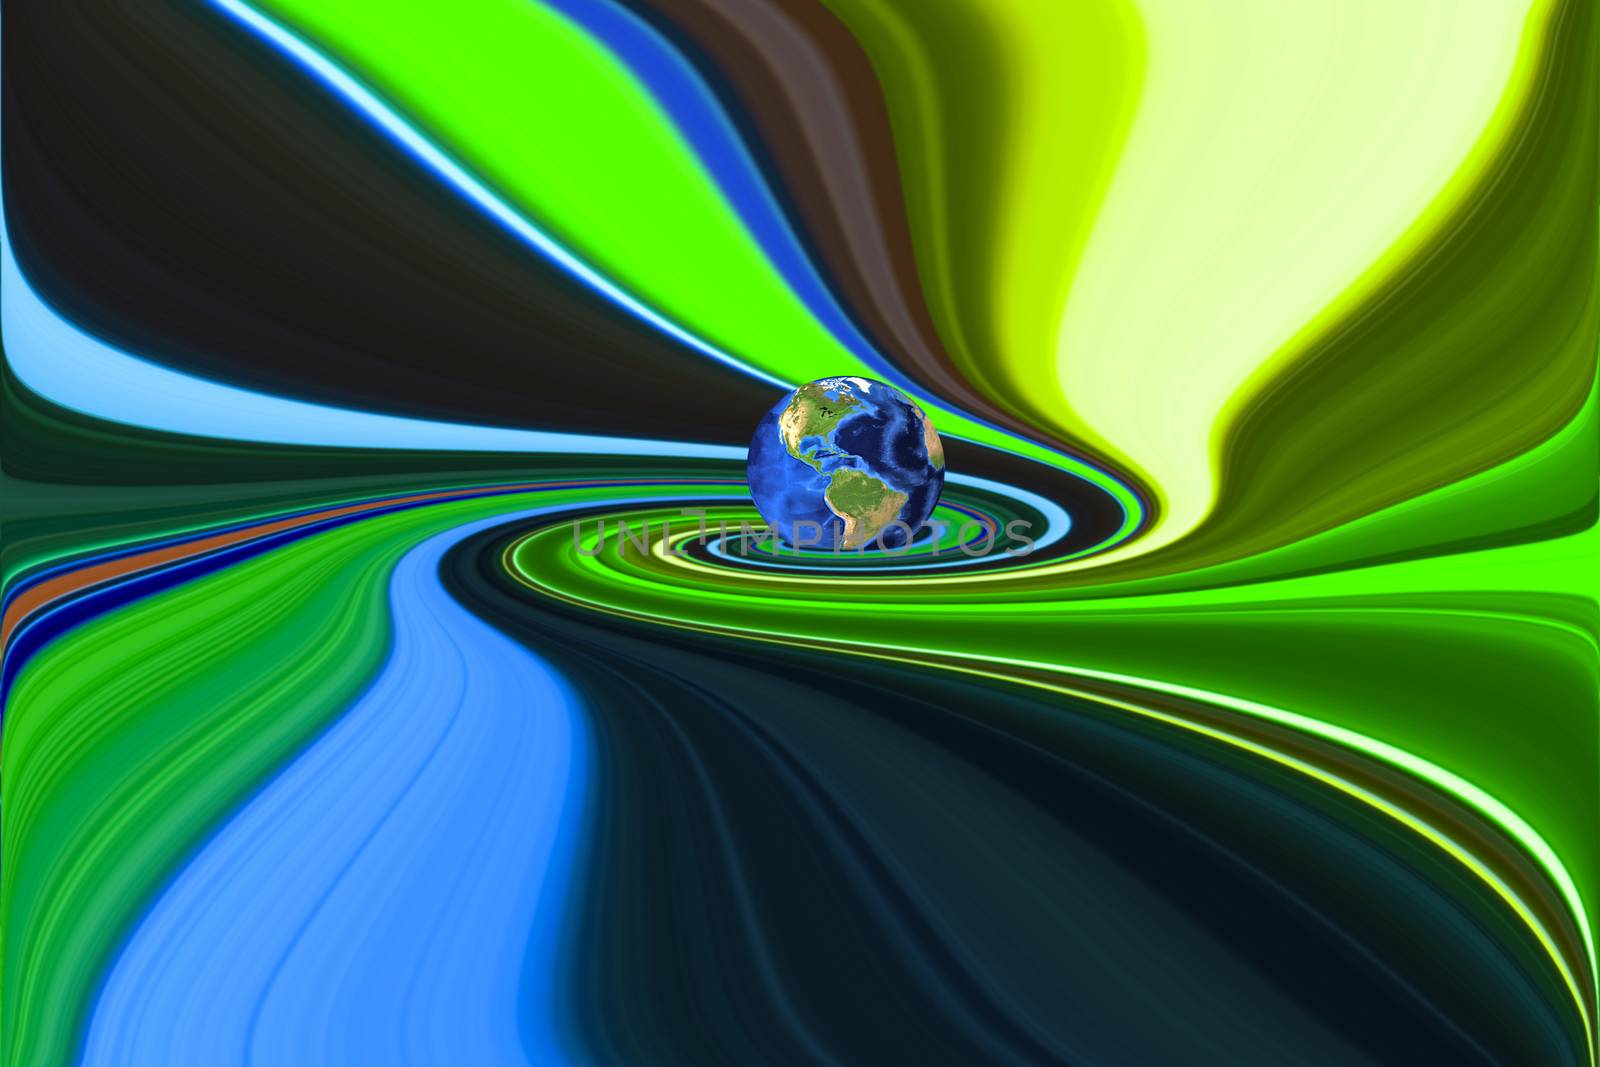 Planet Earth in swirling colorful background